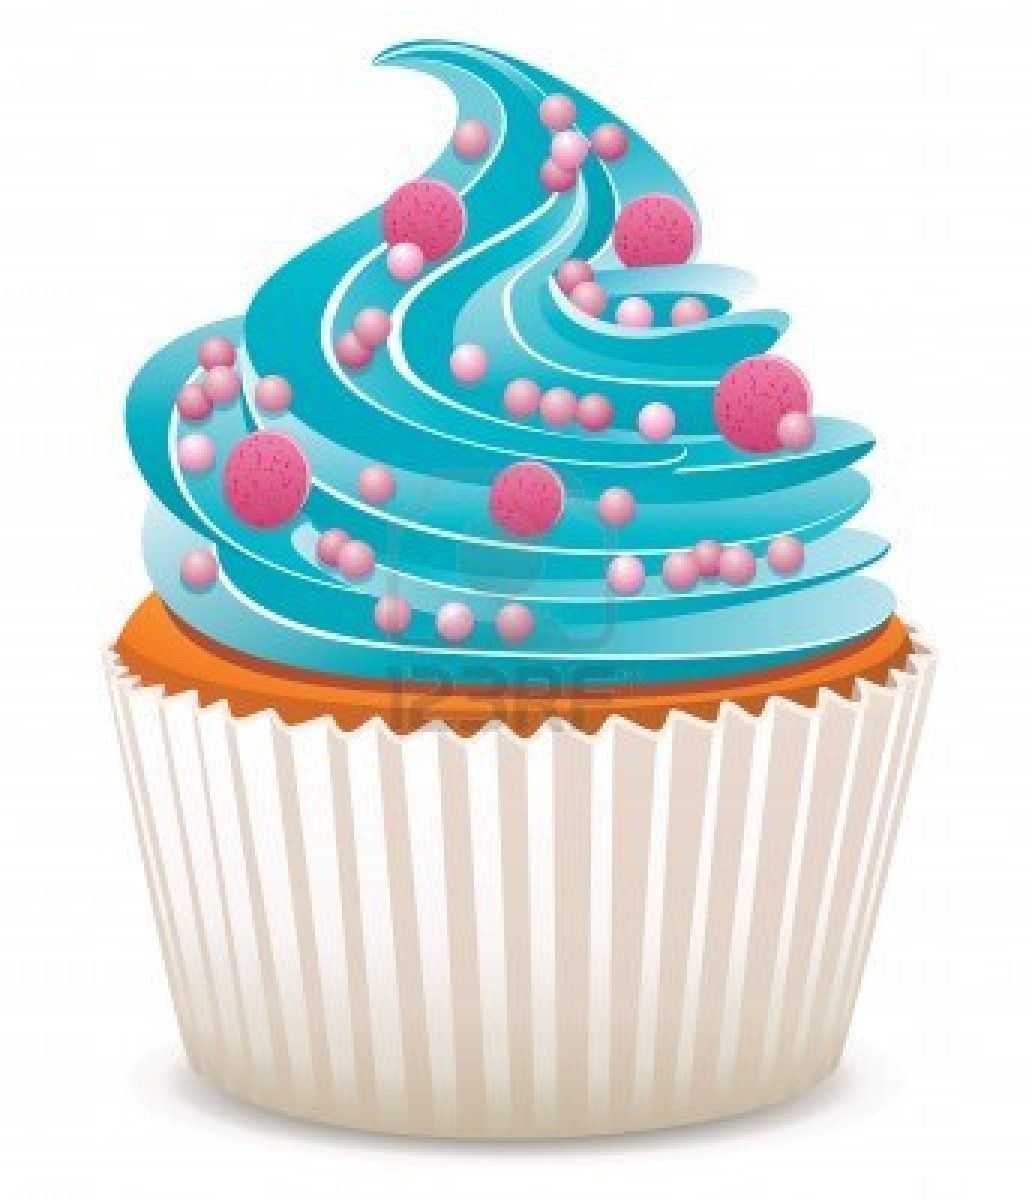 Are fun vector blue. Cupcakes clipart royalty free